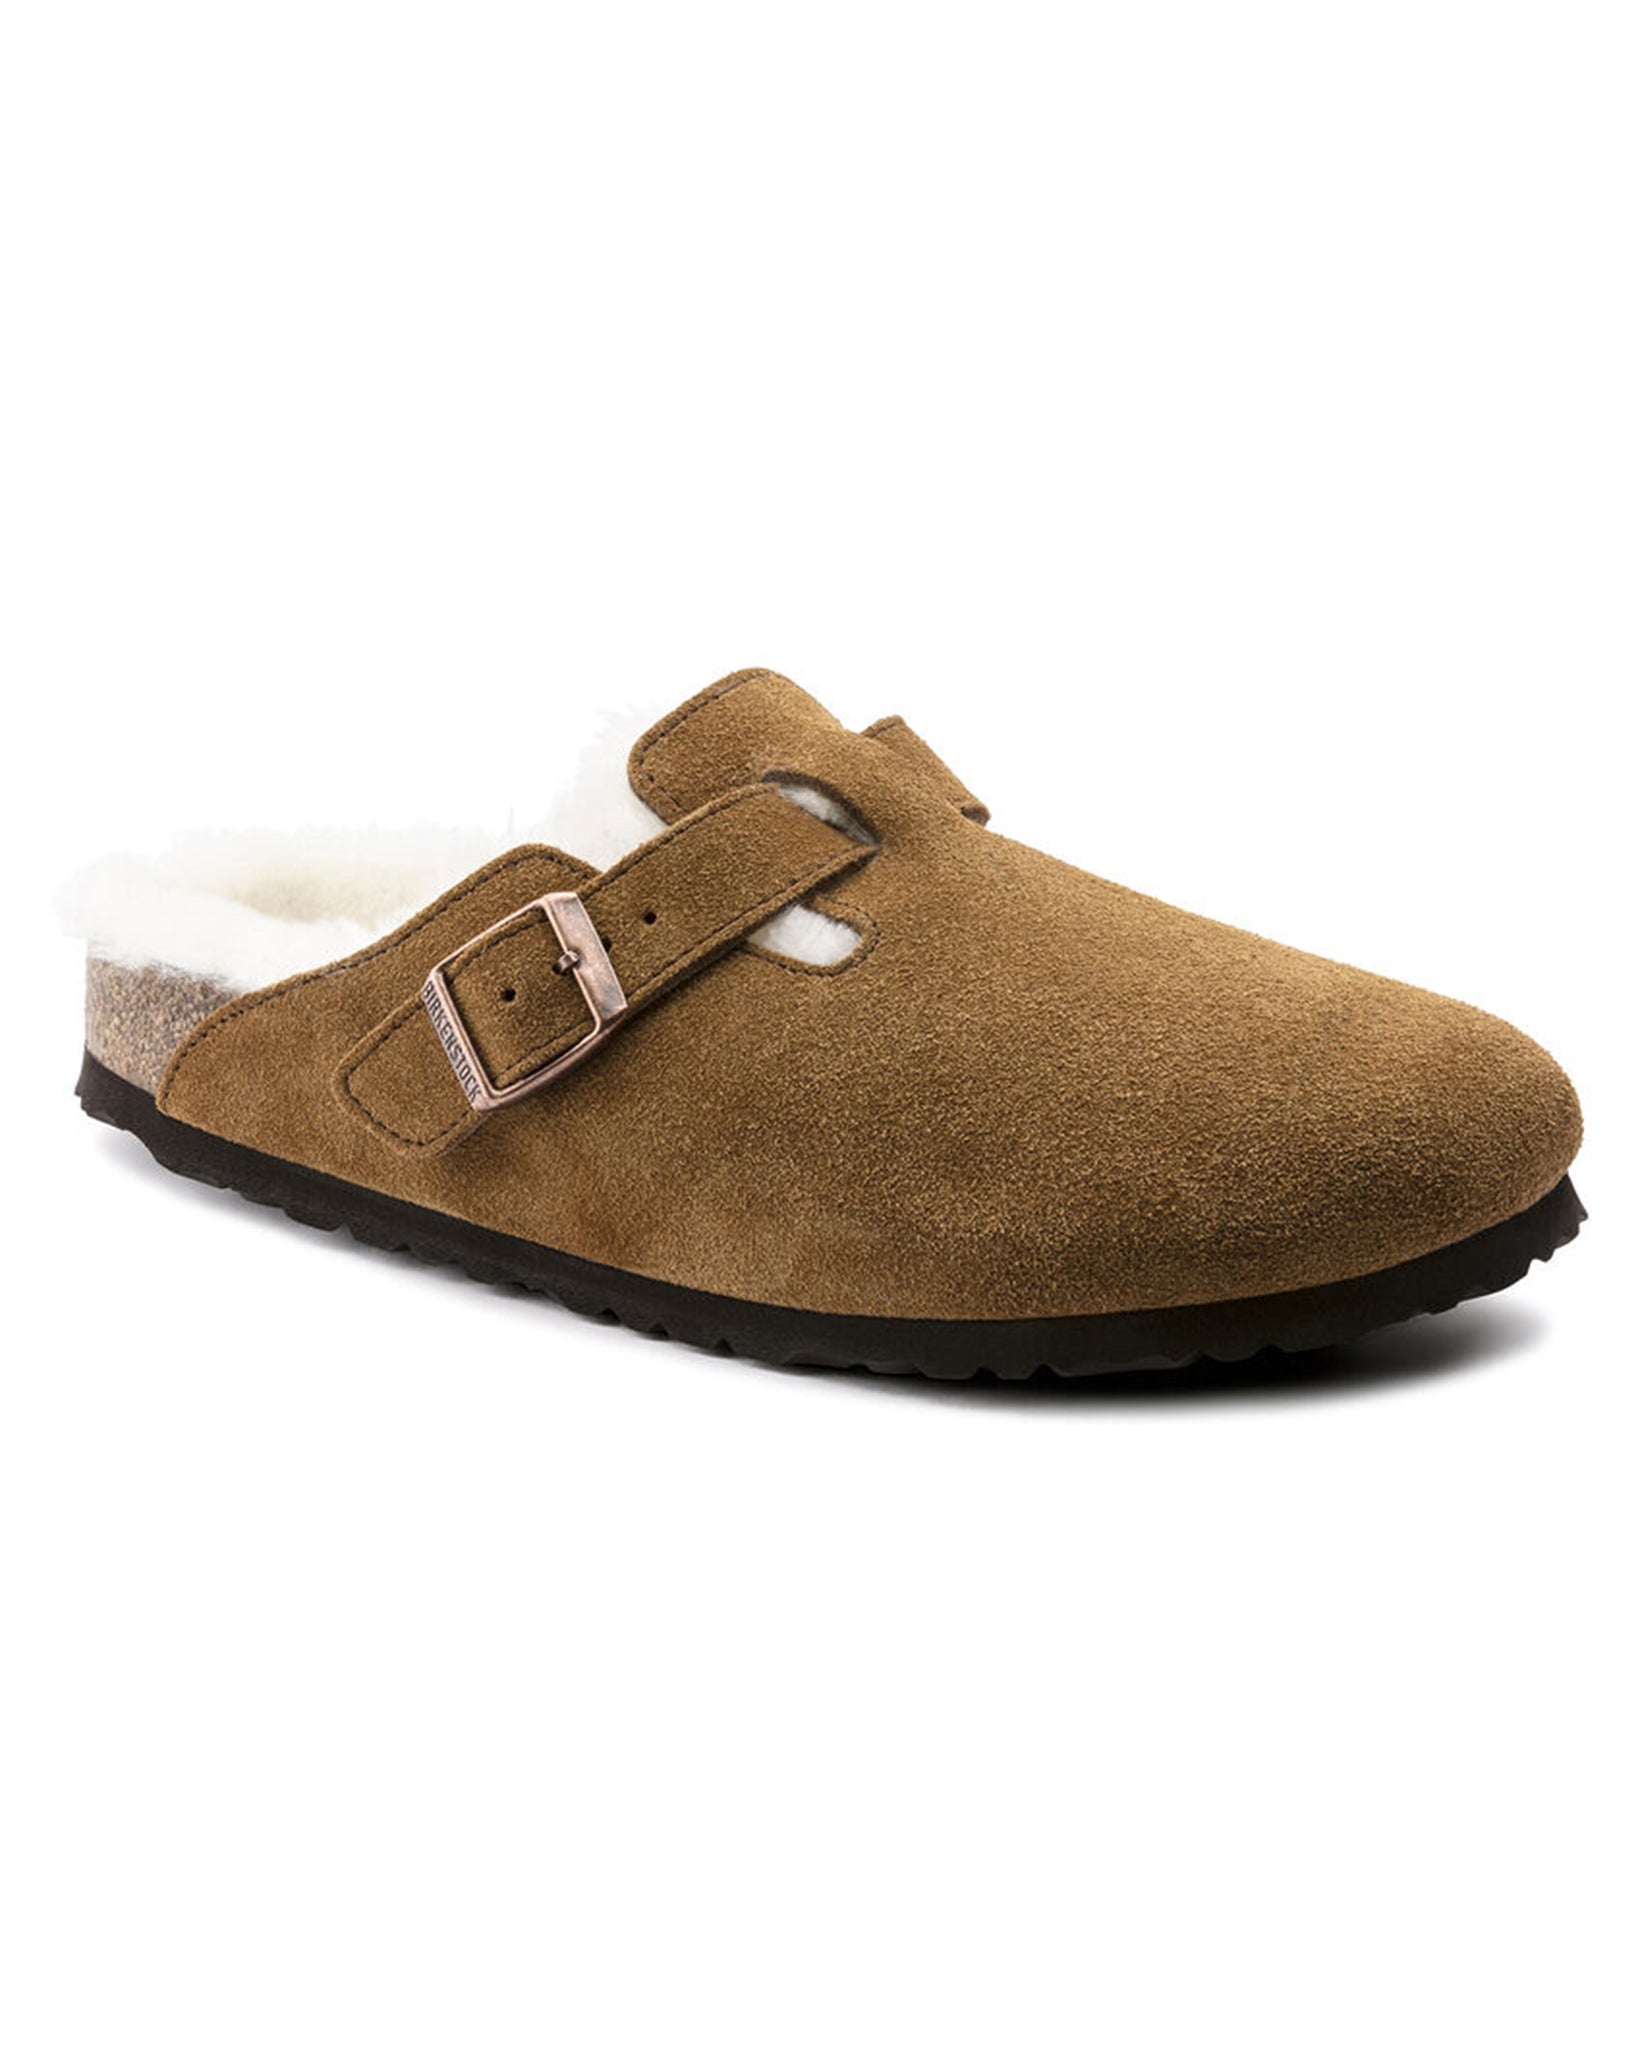 Boston Shearling Mink Suede Leather Clogs